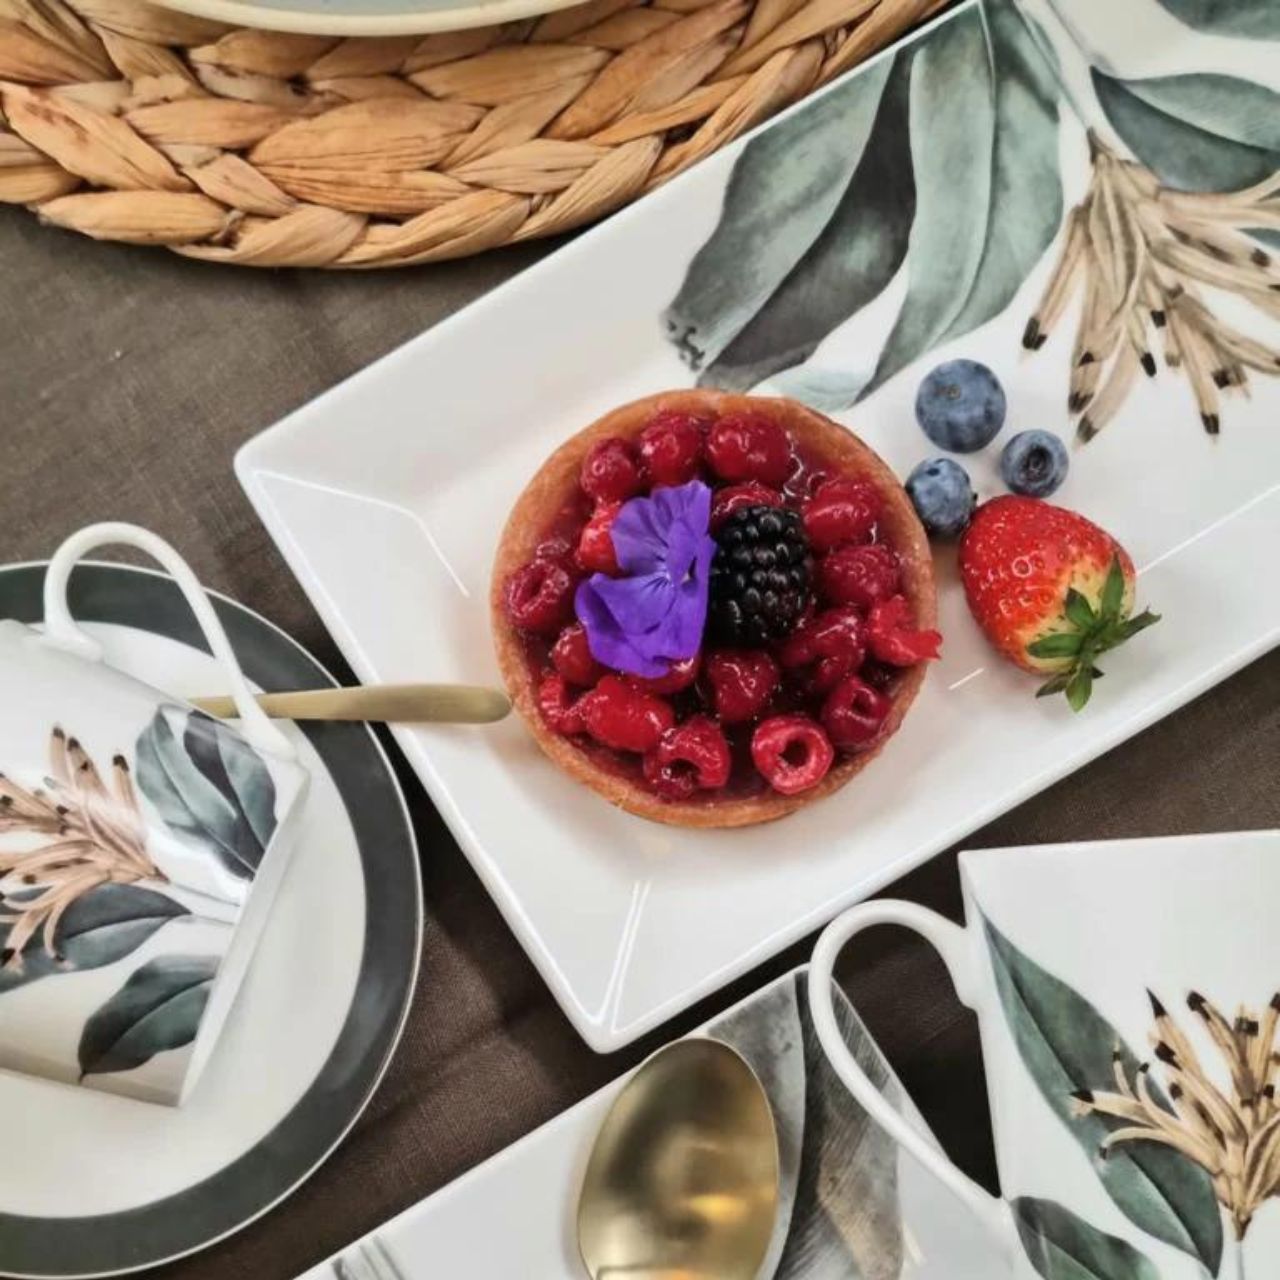 Birds of Paradise Platters Set of 2 by Mindy Brownes  Rectangular in design these plates have a floral pattern and curved rim for stylish serving of cakes, cookies, and more.